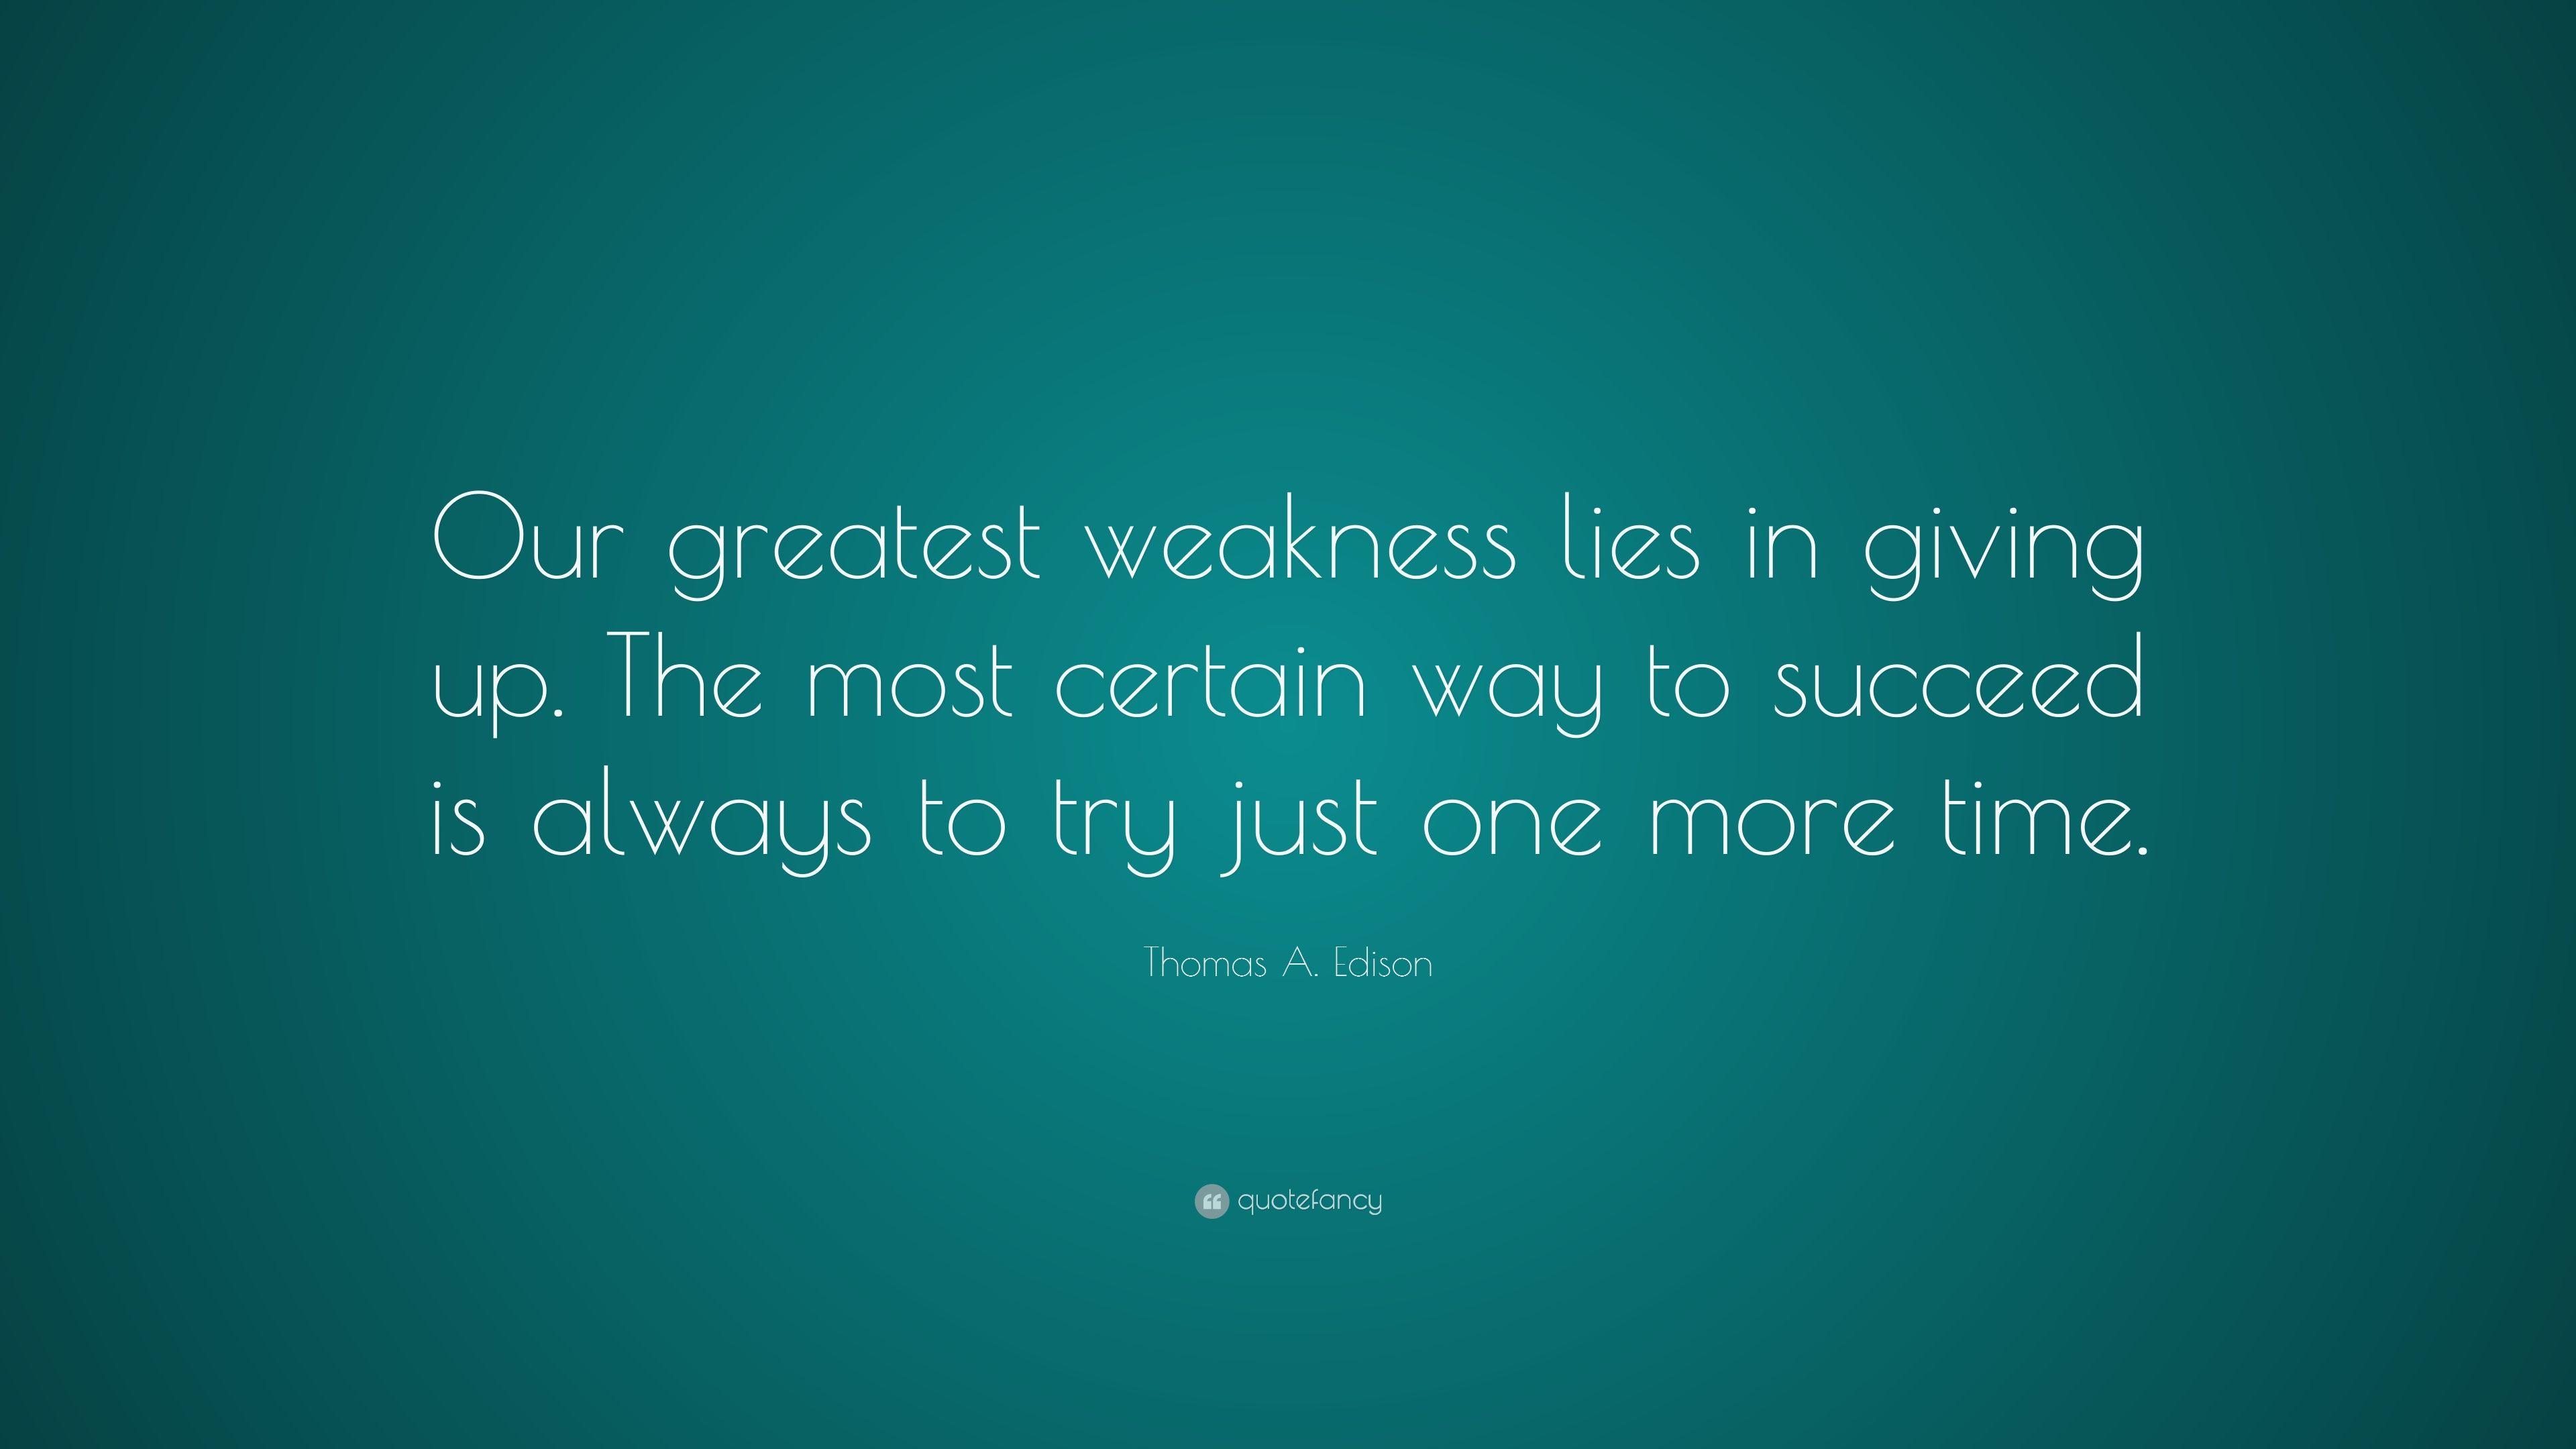 Thomas A. Edison Quote: “Our greatest weakness lies in giving up